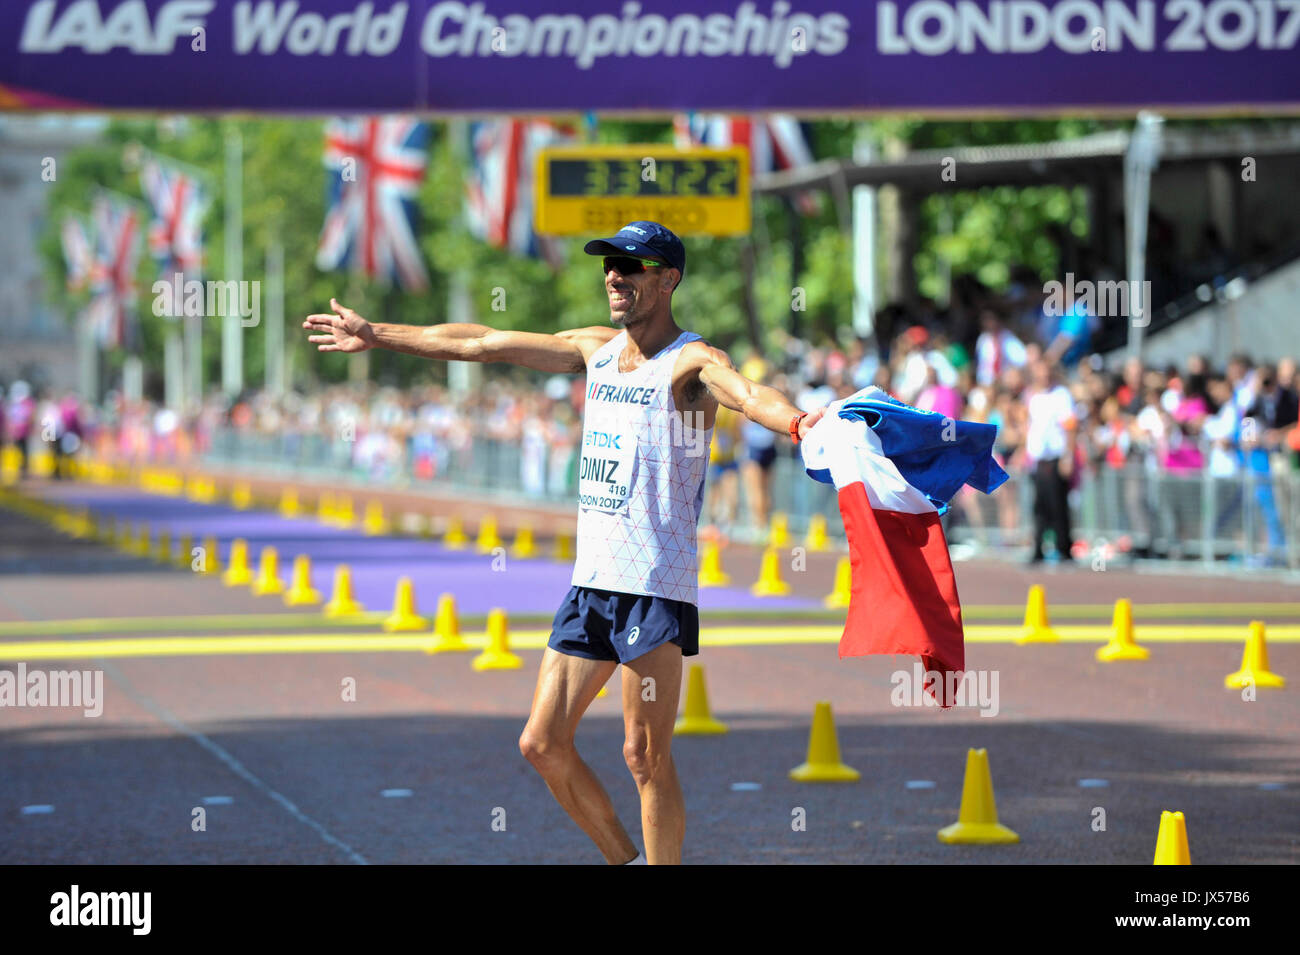 London, UK.  13 August 2017. Yohann Diniz (FRA) celebrates after winning the men's race. Race walkers take part in the 50km mixed race walk in The Mall, on day ten of The IAAF World Championships London 2017.   The route takes in The Mall, Buckingham Palace and Admiralty Arch.    Credit: Stephen Chung / Alamy Live News Stock Photo